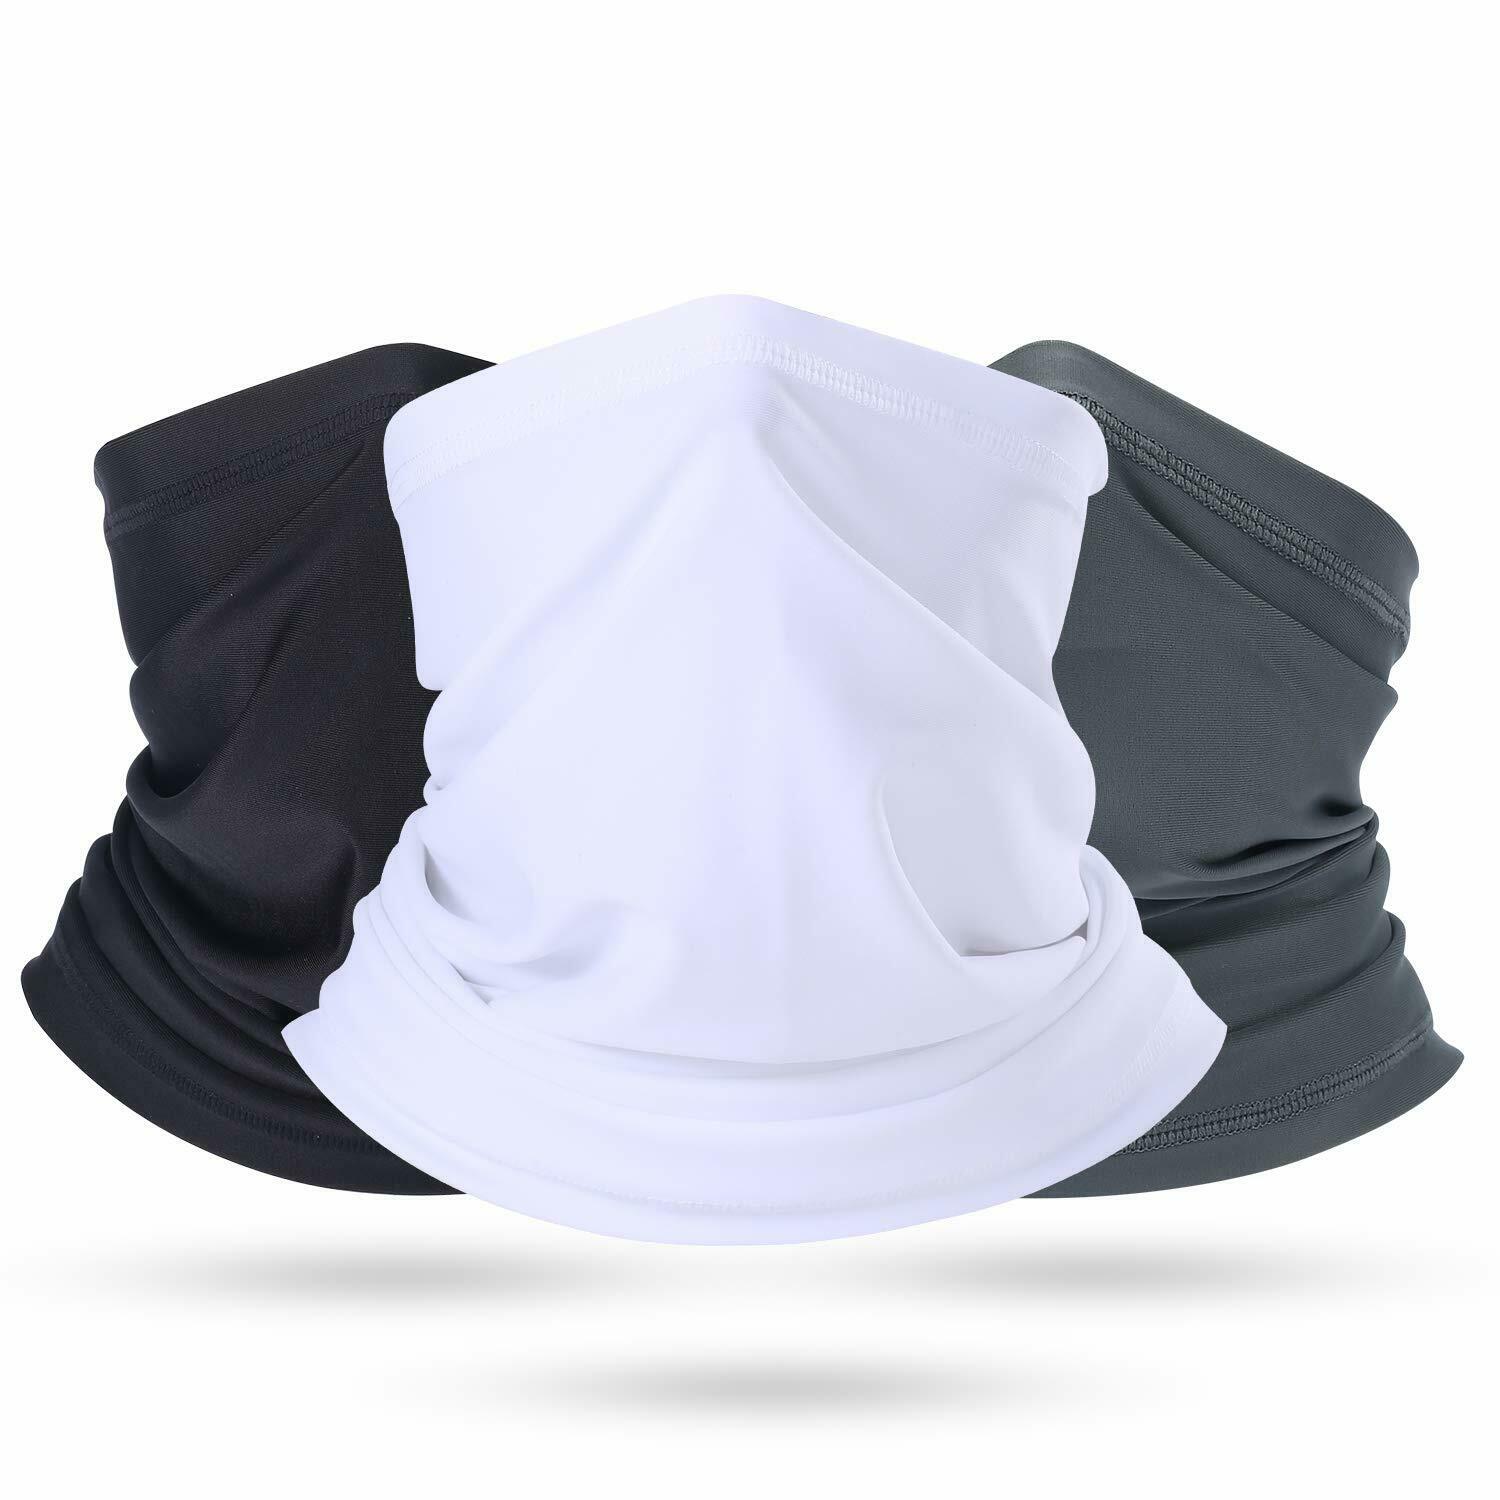 Gaiter Masks: How It Protect You From Heat & Dirty Surroundings